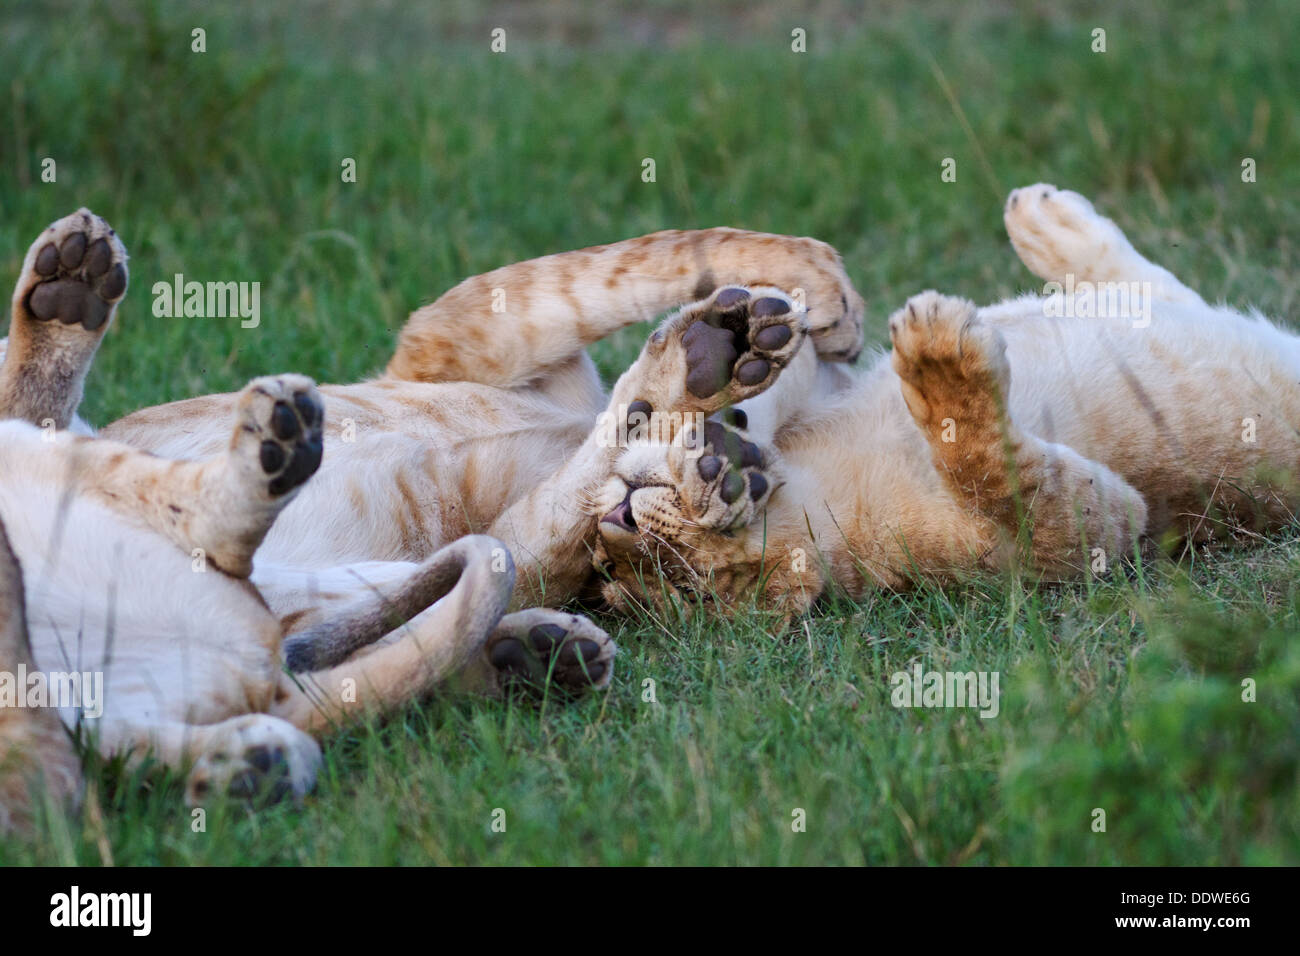 Two young lions rolling on their backs in the grass, paws intertwined in the air, playing, close up detail, Masai Mara, Kenya, E Stock Photo